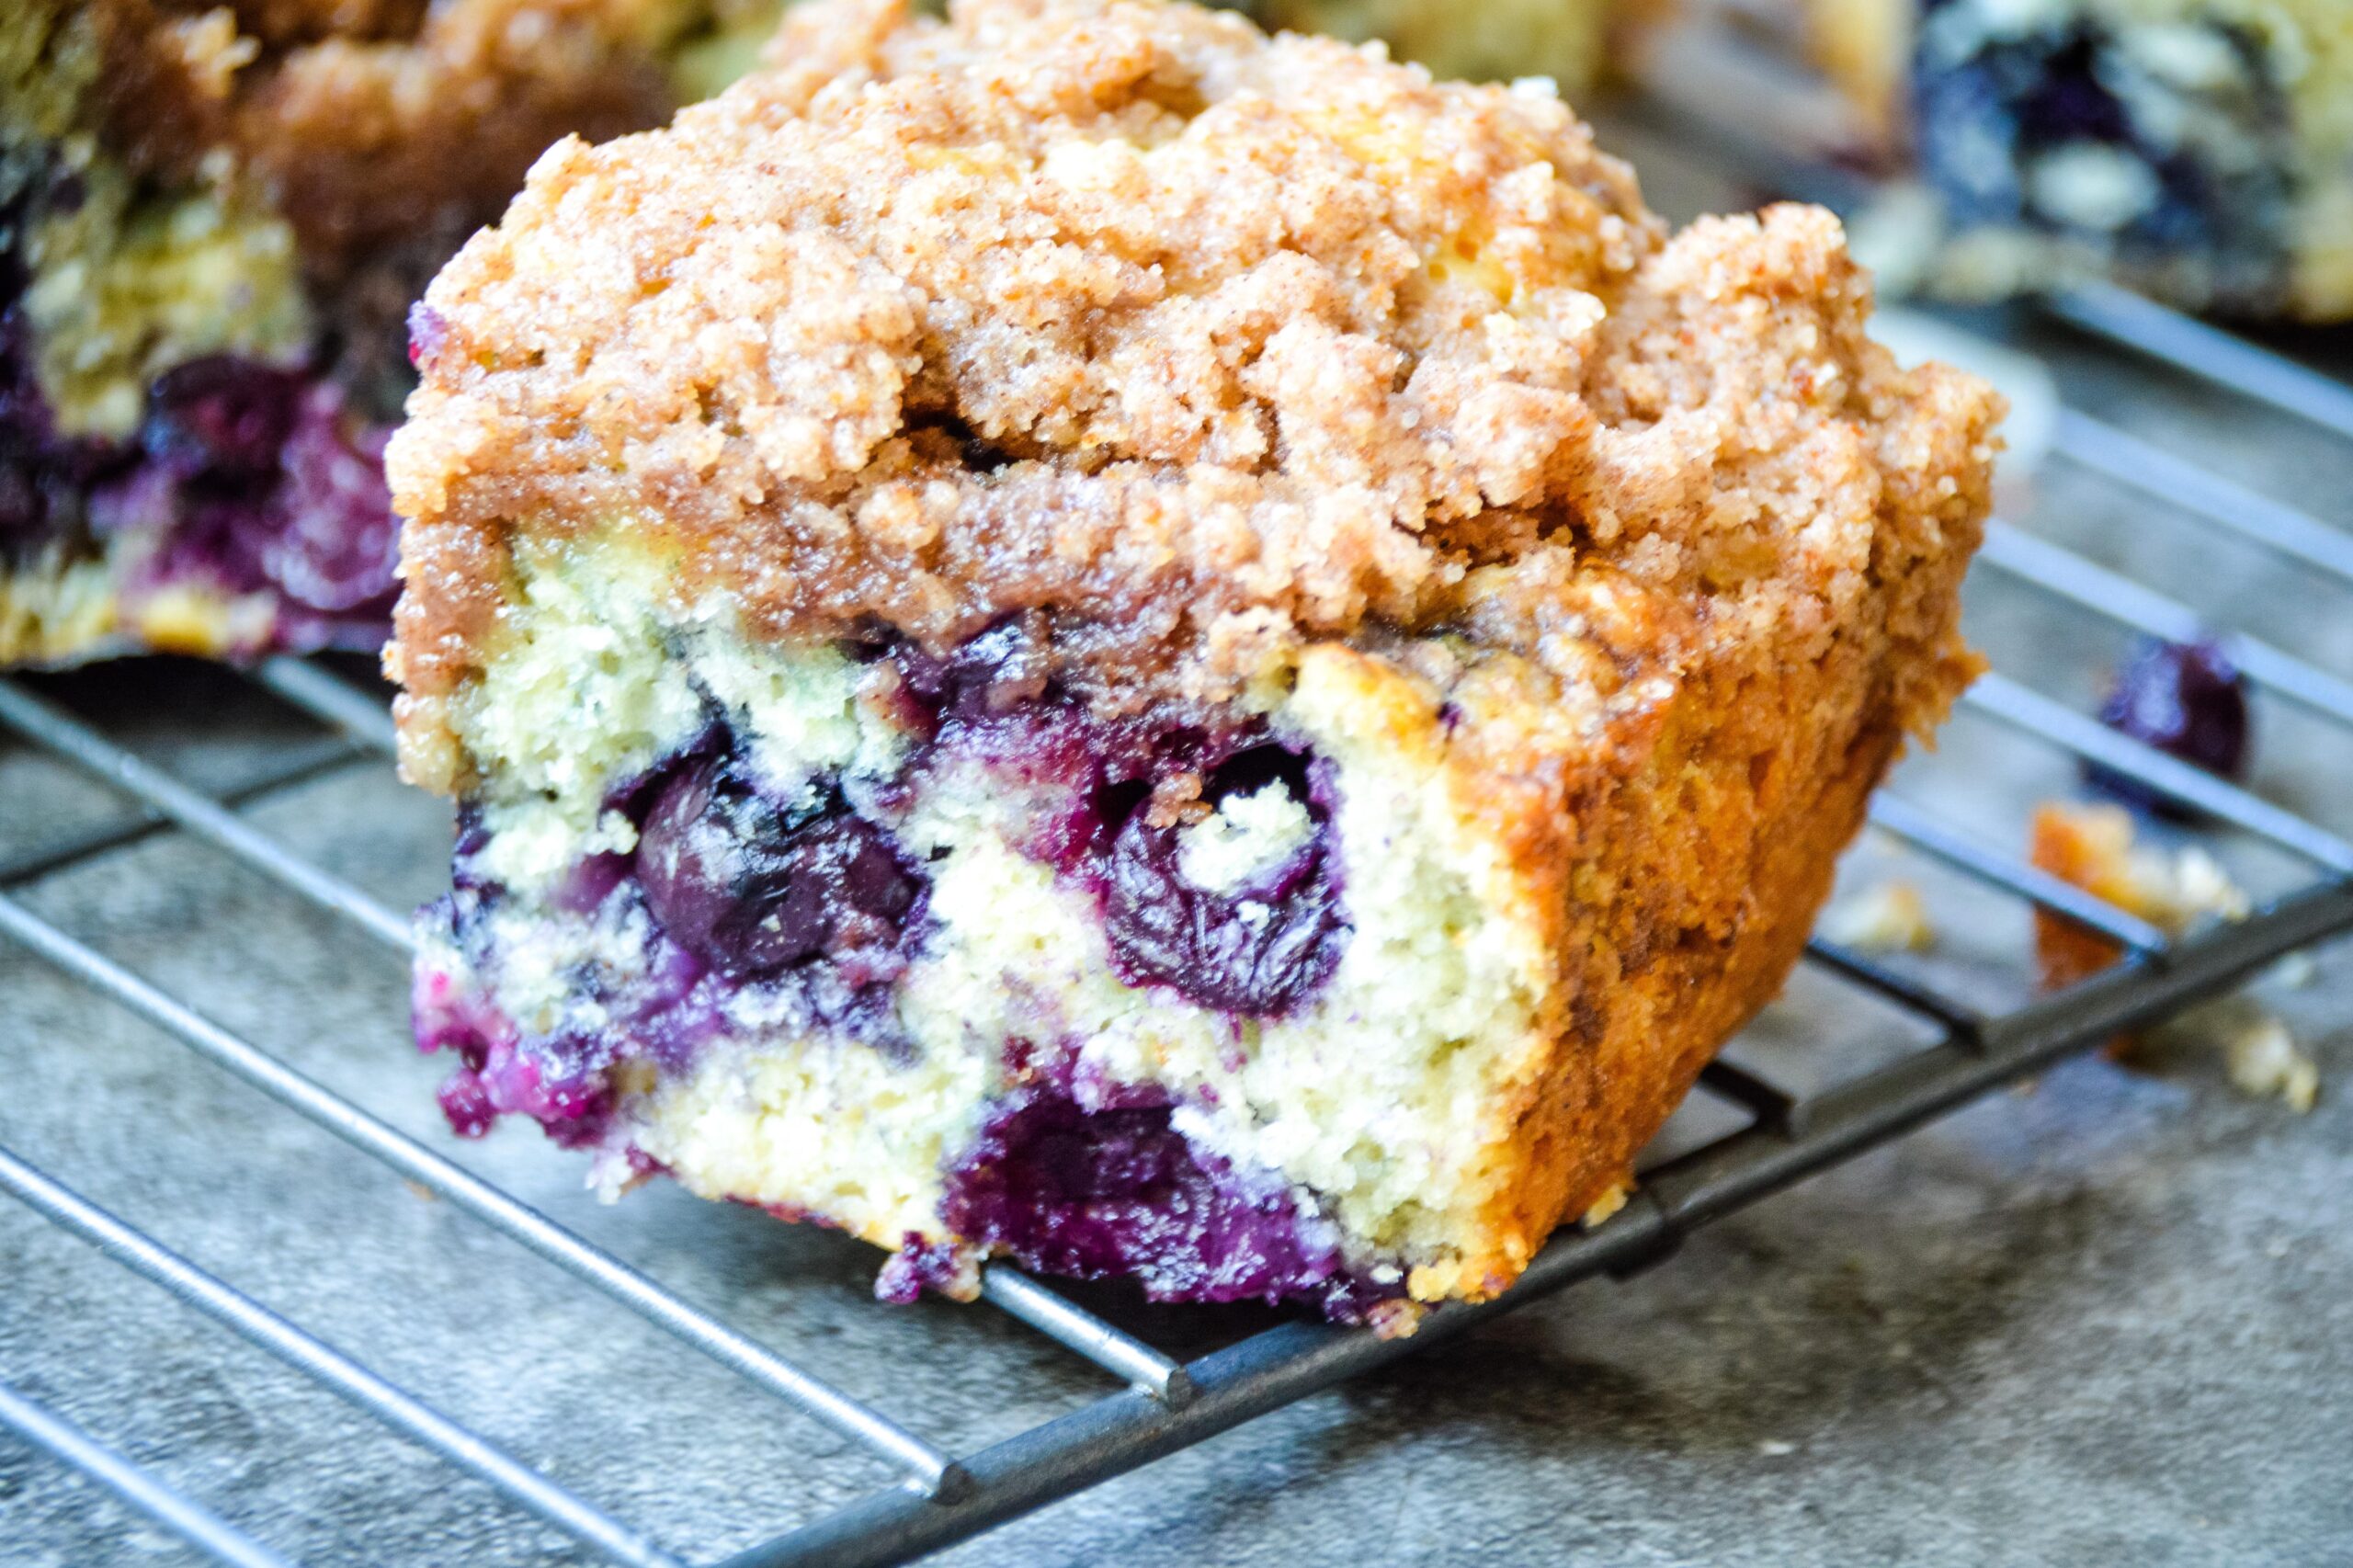  Blueberry season calls for a delicious coffee cake like this one.